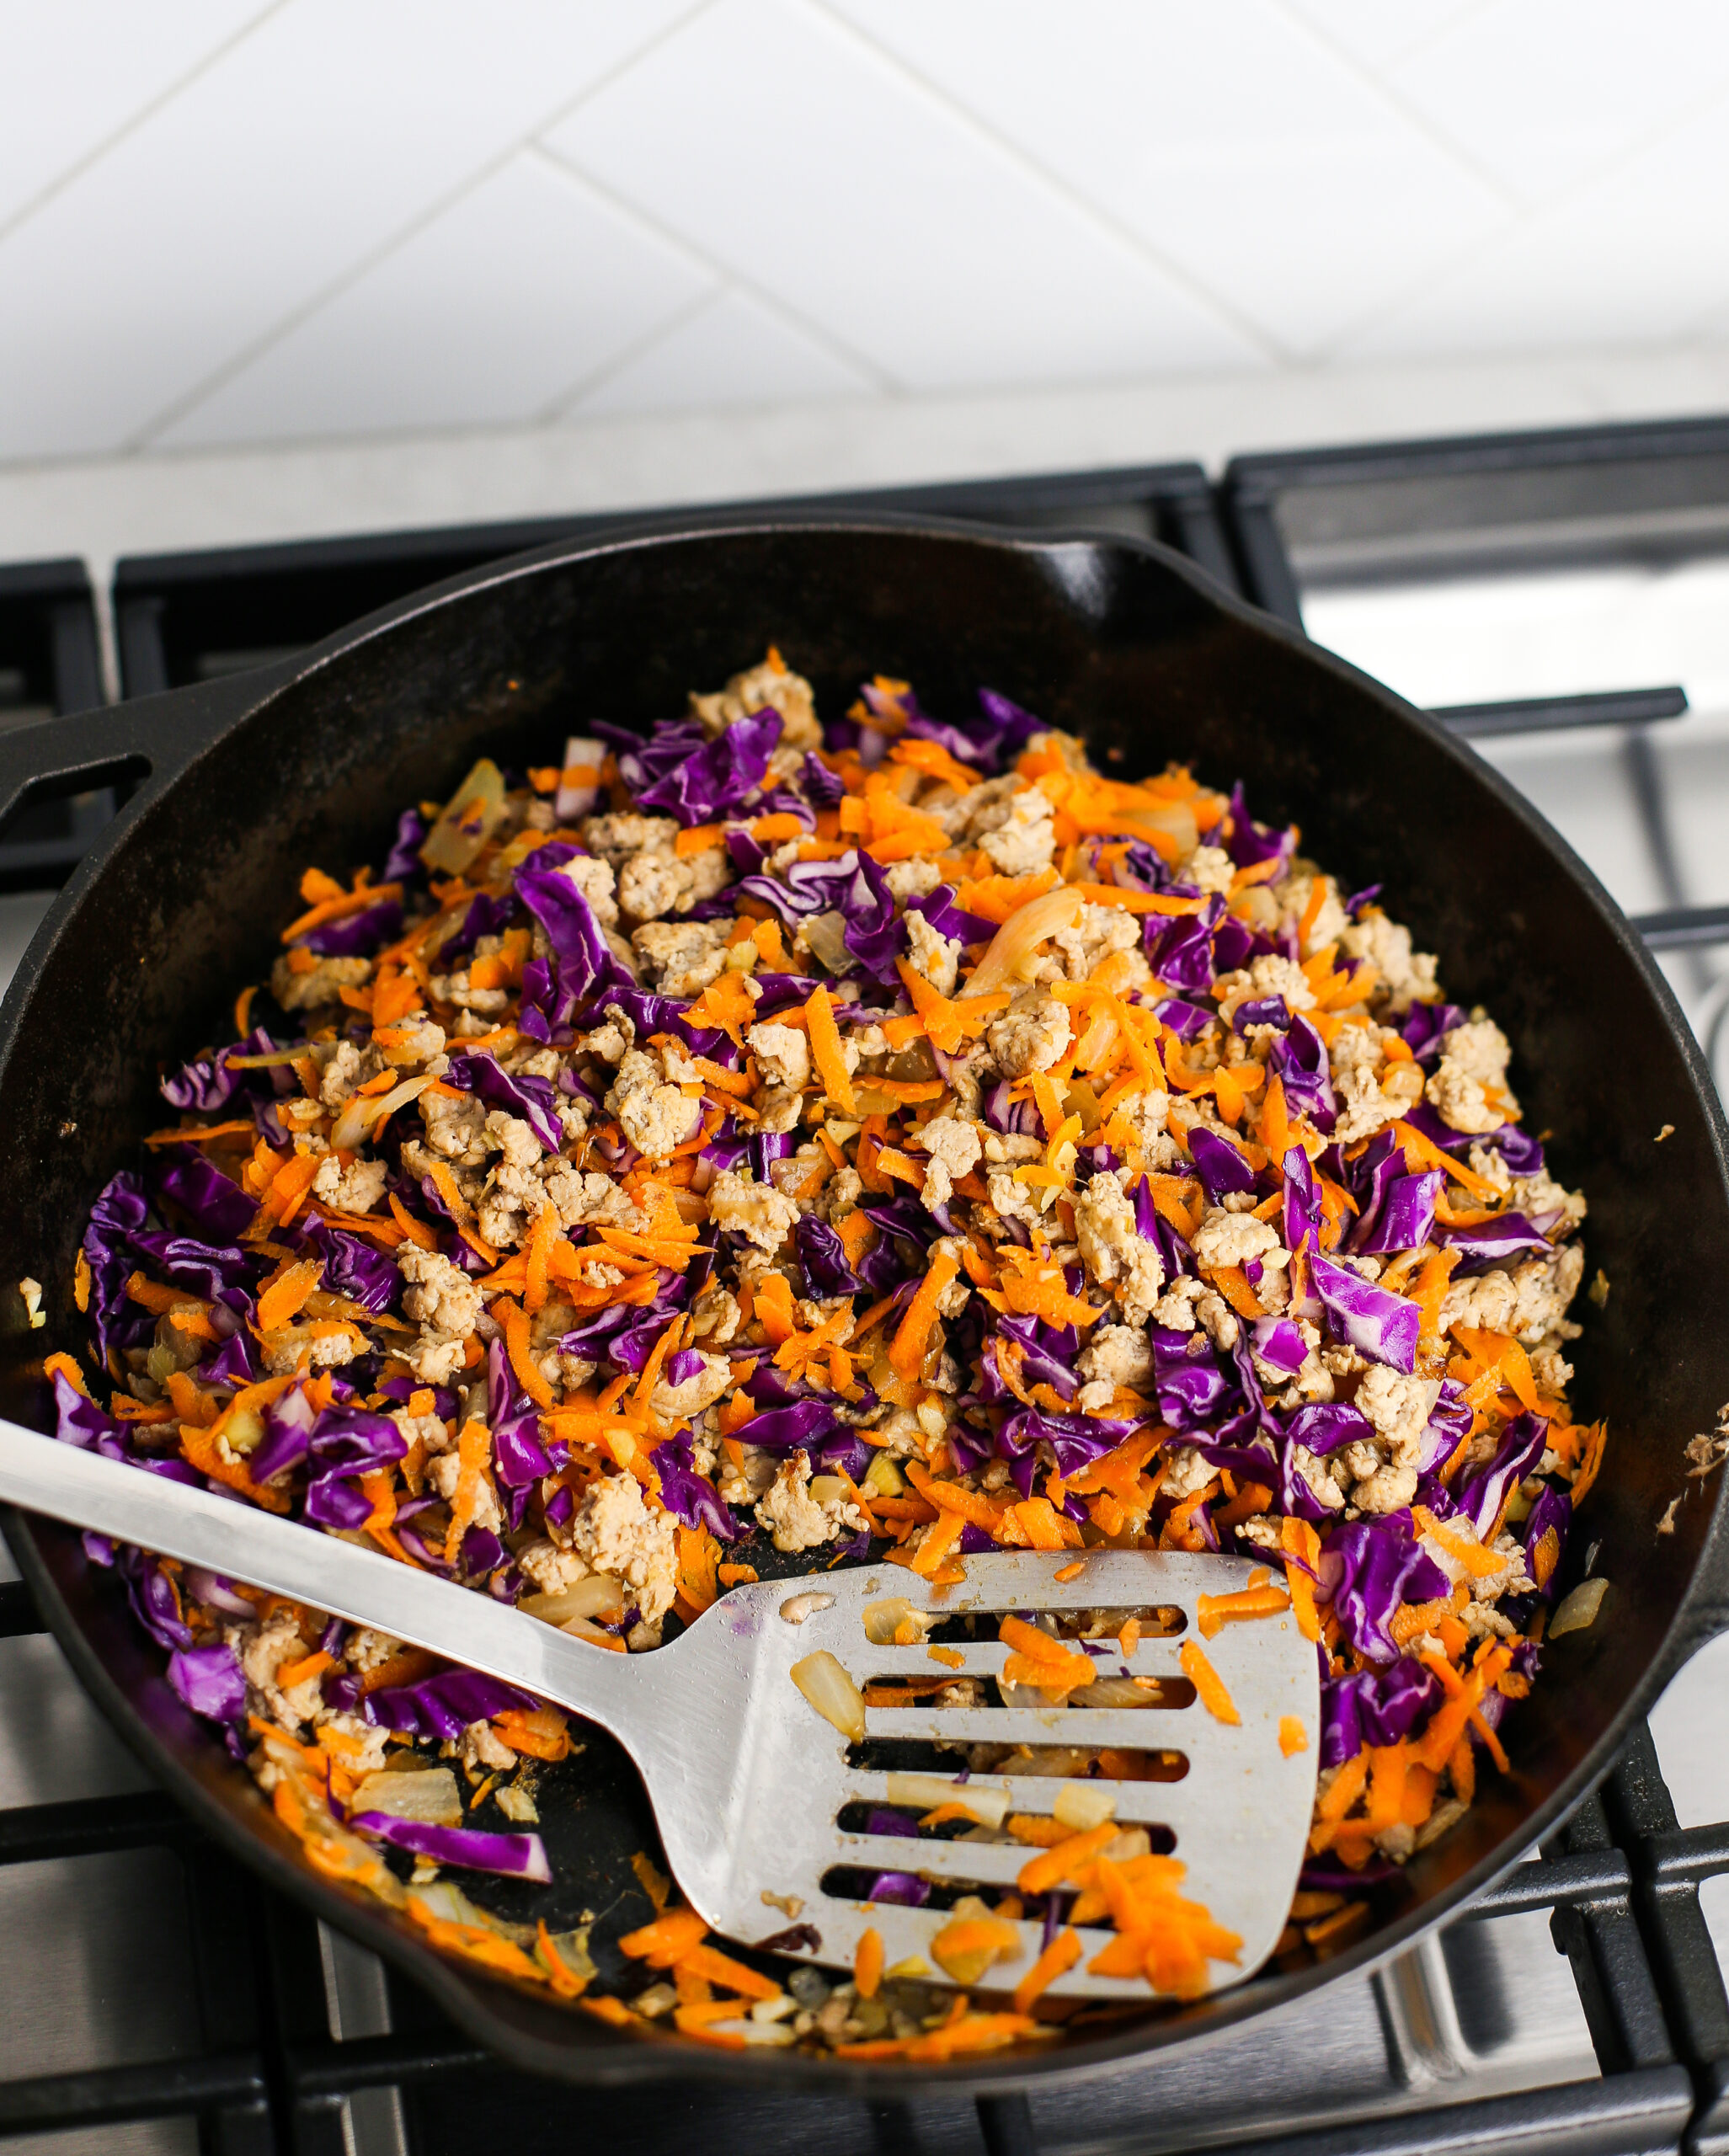 Ground chicken, chopped onions, shredded carrots and cabbage in a cast iron skillet.